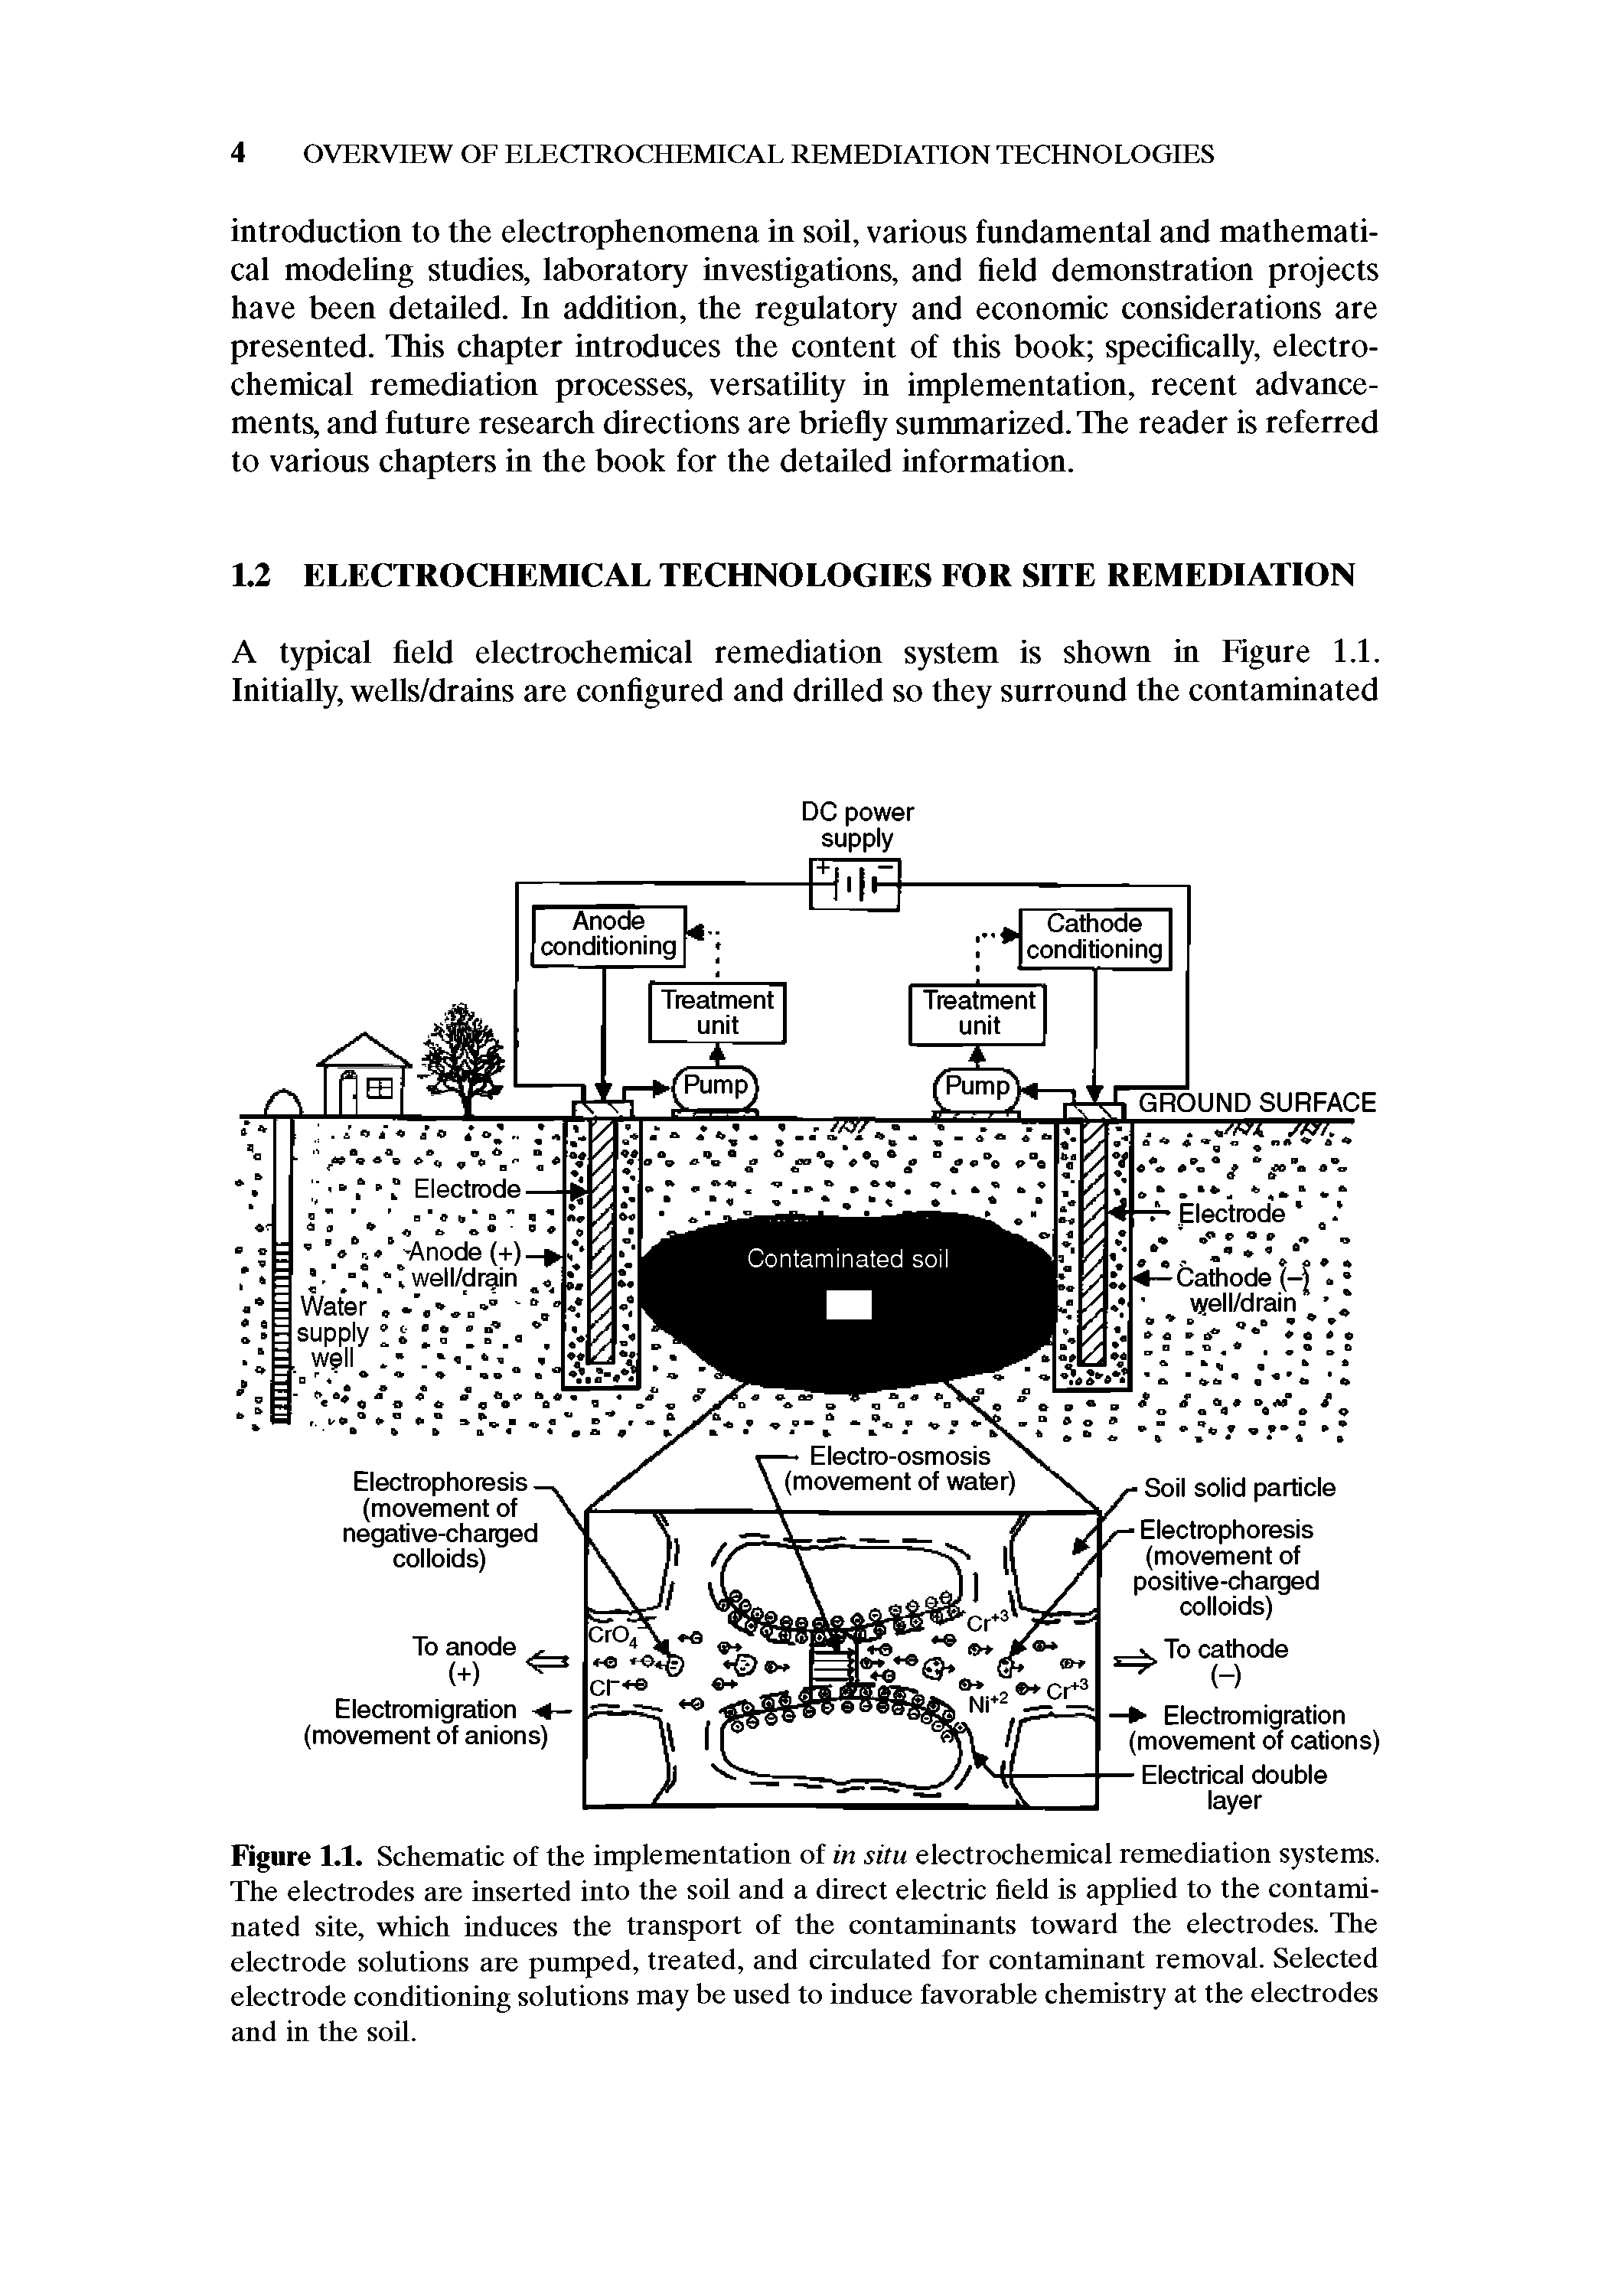 Figure 1.1. Schematic of the implementation of in situ electrochemical remediation systems. The electrodes are inserted into the soil and a direct electric field is applied to the contaminated site, which indnces the transport of the contaminants toward the electrodes. The electrode solntions are pumped, treated, and circulated for contaminant removal. Selected electrode conditioning solutions may be used to induce favorable chemistry at the electrodes and in the soil.